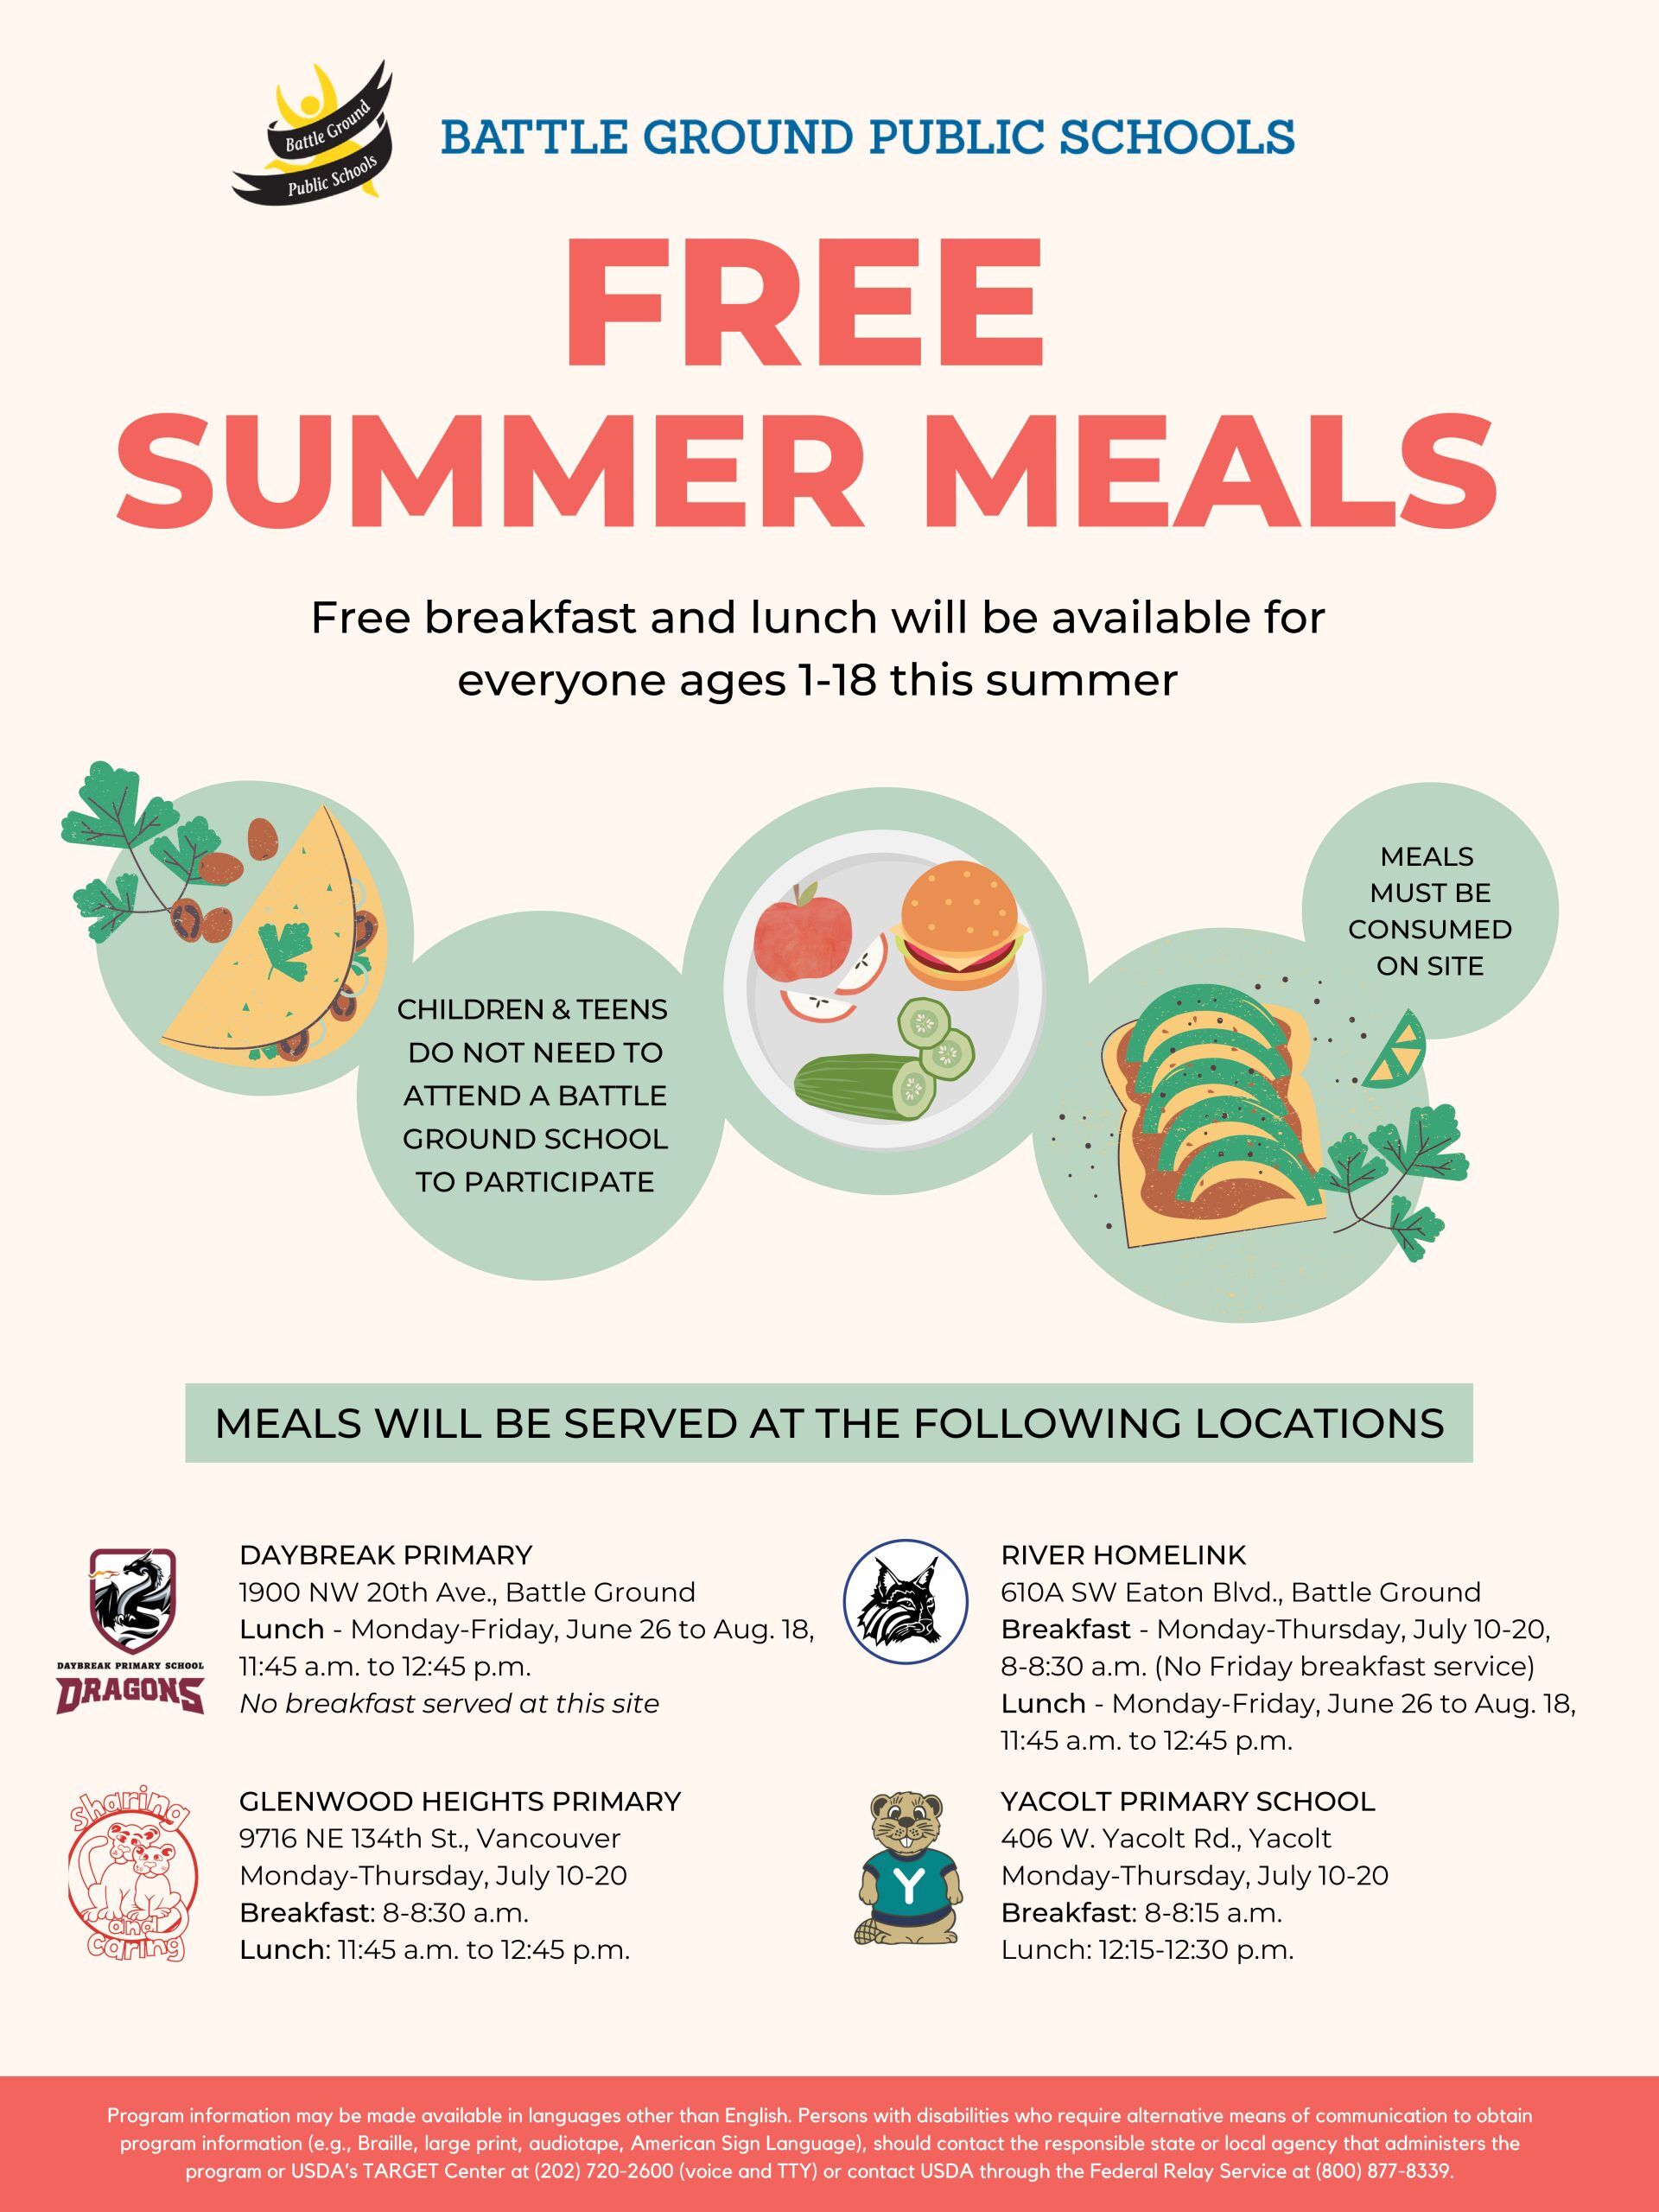 90-224 cecilware free breakfast and lunch will be provided to children and teens aged 1-18 at multiple battle ground public schools locations this summer, through the summer food services program sponsored by the district, helping ensure access to nutritious meals during the summer break.